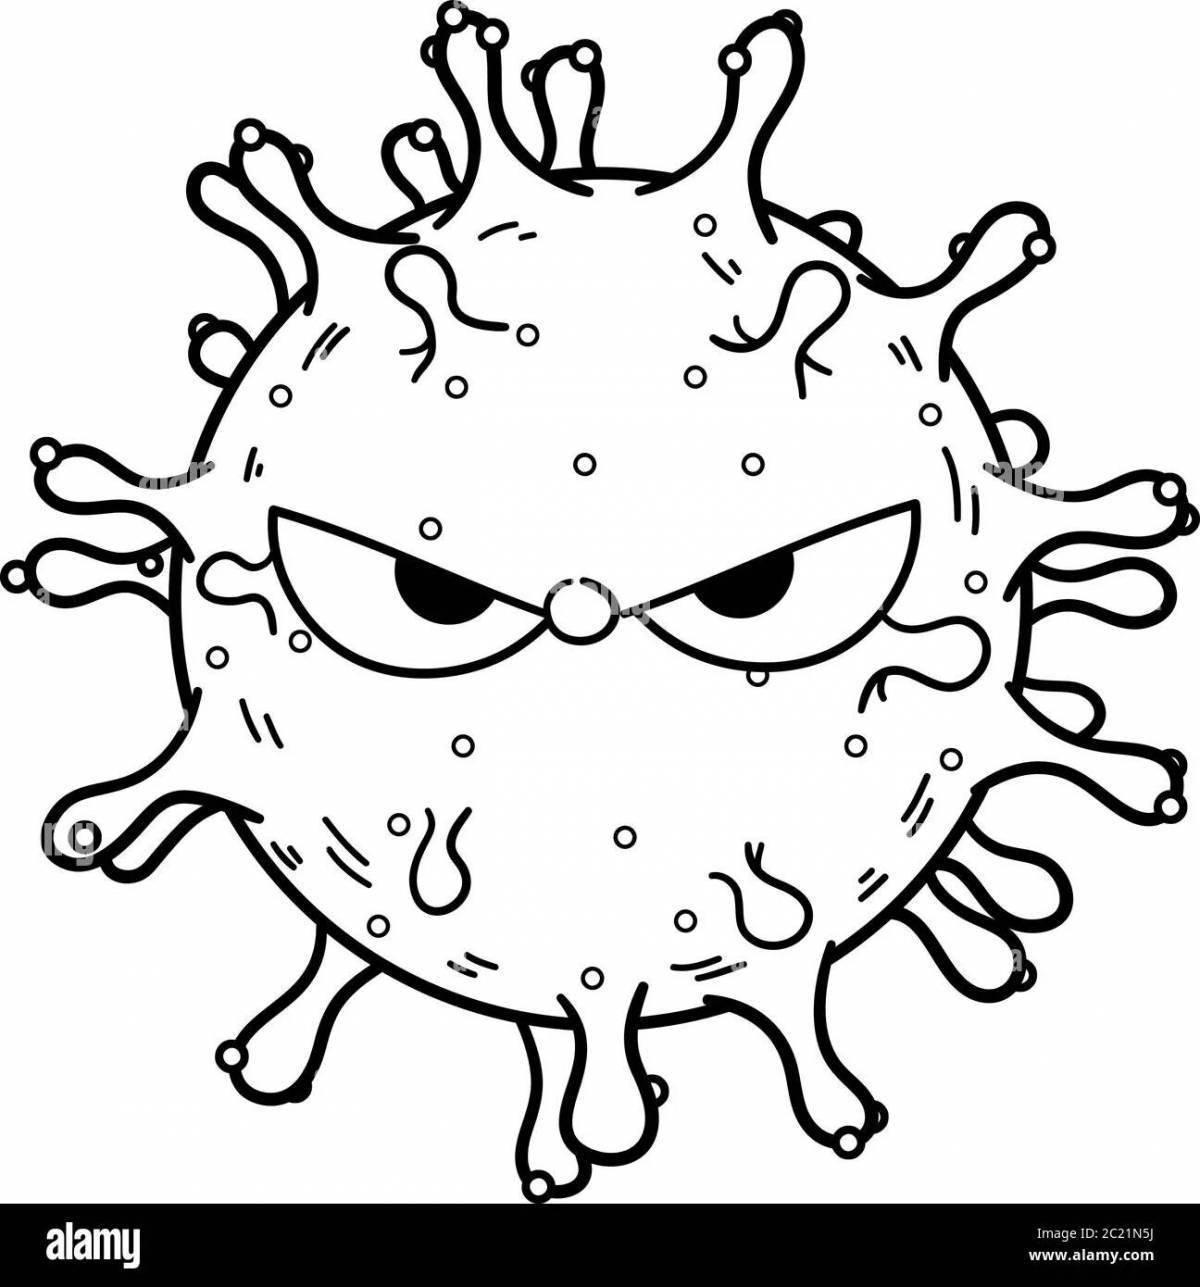 Colored crazy microbes coloring pages for kids